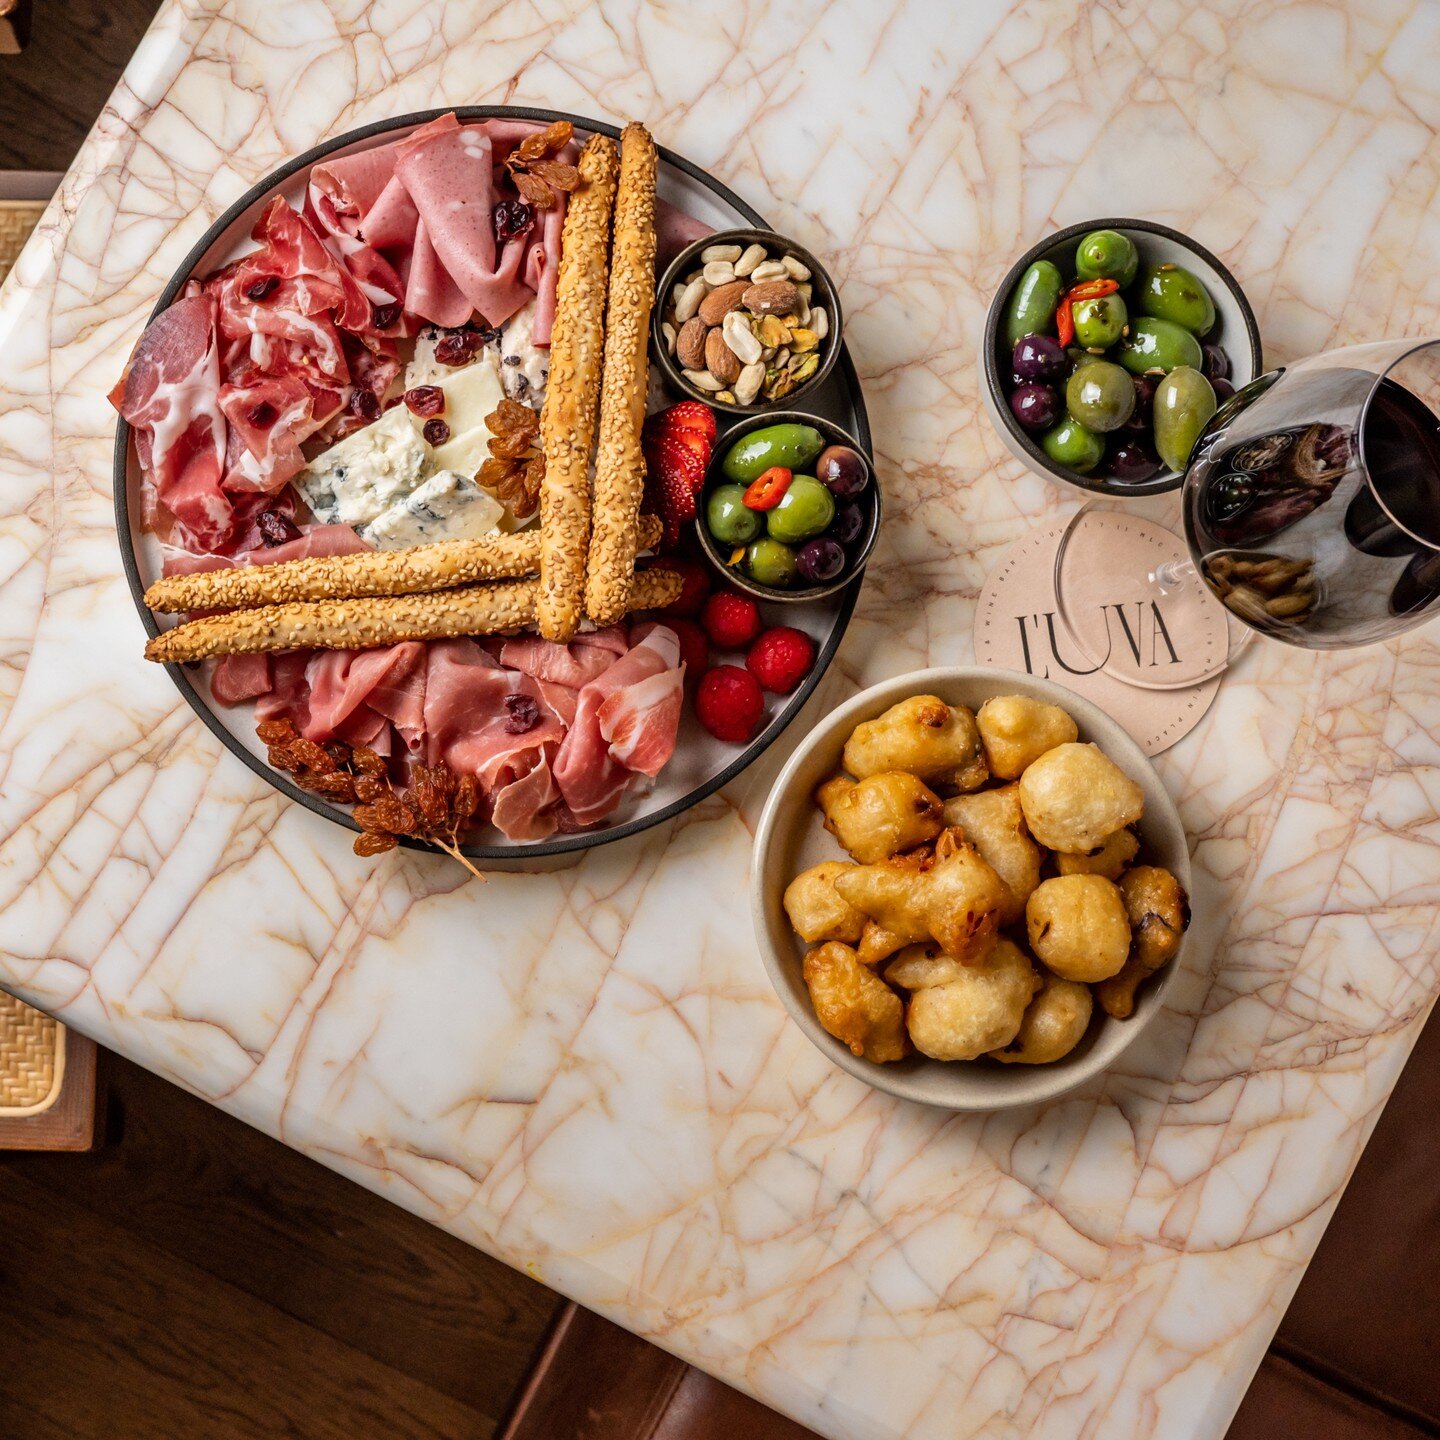 Tagliere salumi &amp; cheese with a side of our pittole (puffed up small balls of dough, that are crispy on the outside and soft on the inside, ours are stuffed with anchovy, onion and tomato) 
Perfect way to start any meal. 

Check the link in our b